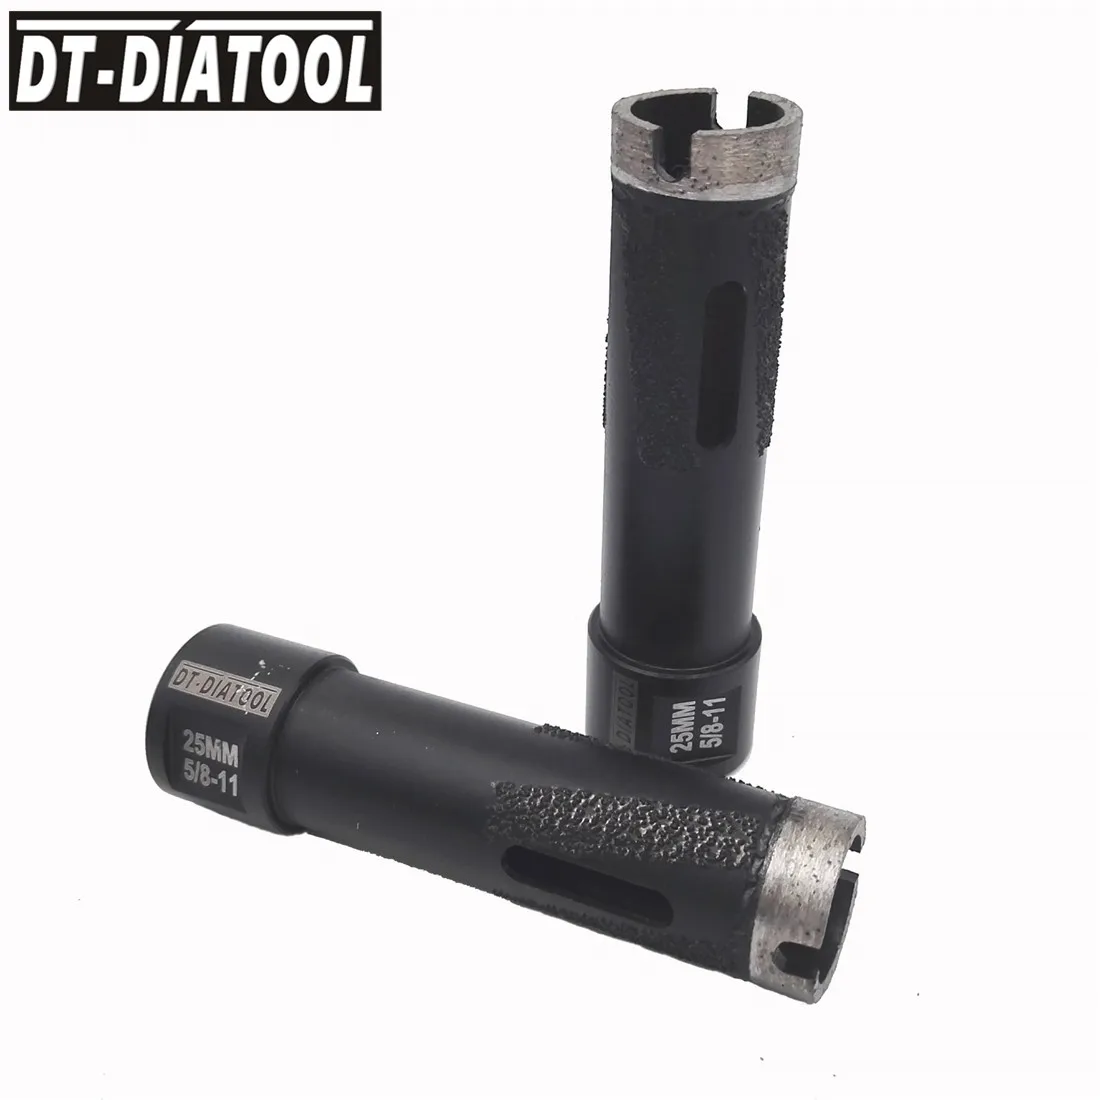 DT-DIATOOL 2units Diameter 25mm side protection Welded Drill Bits Diamond Drilling Hole Saw Dry or Wet with 5/8-11 Thread wet